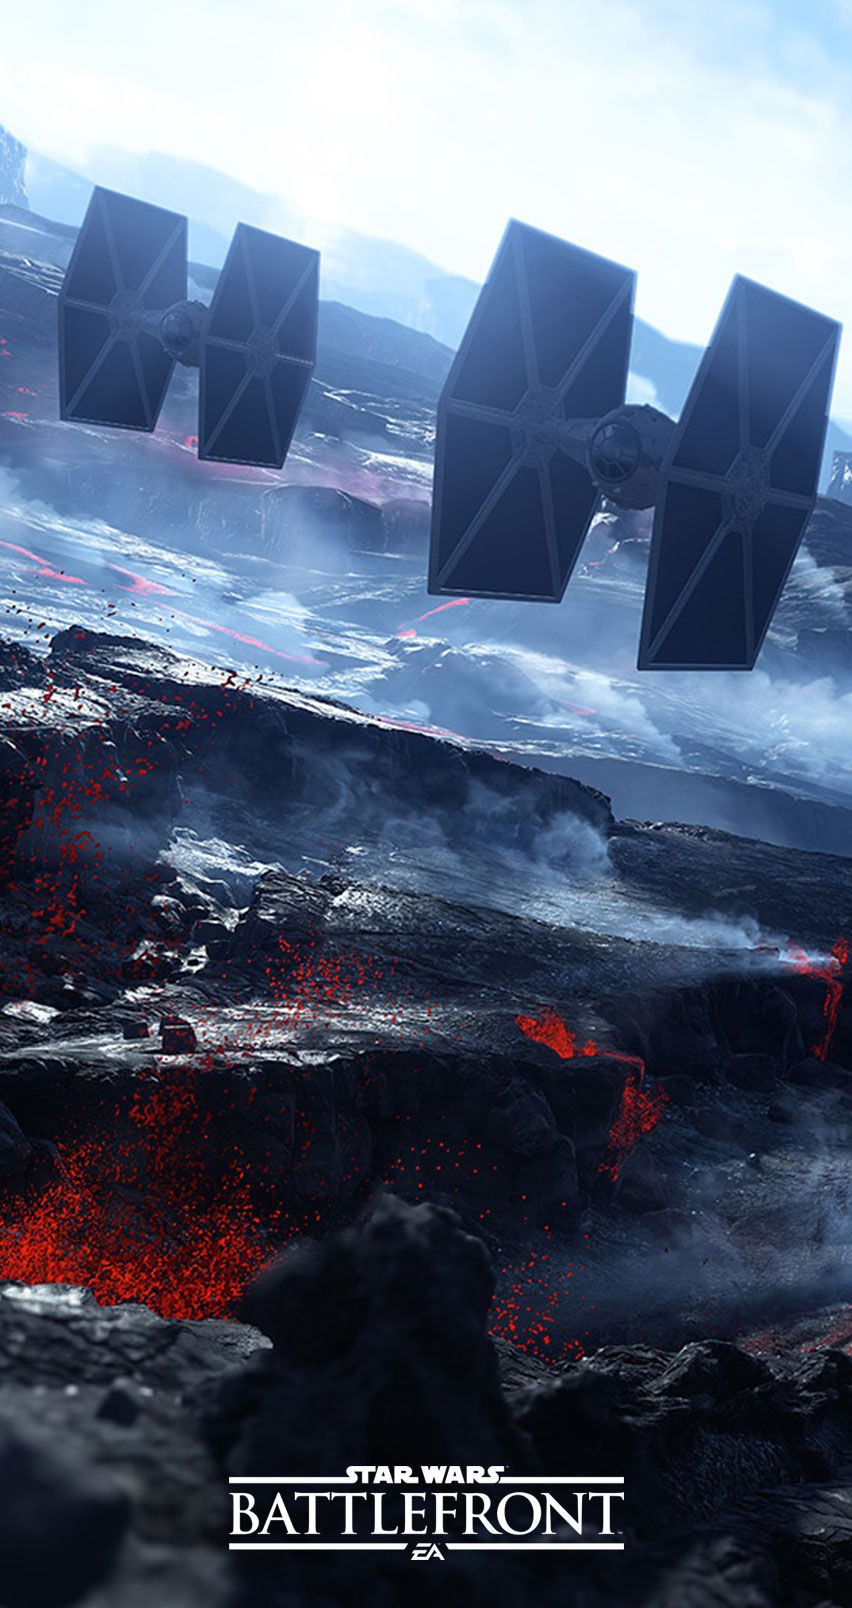 Star Wars Battlefront - Awesome Smartphone Wallpapers